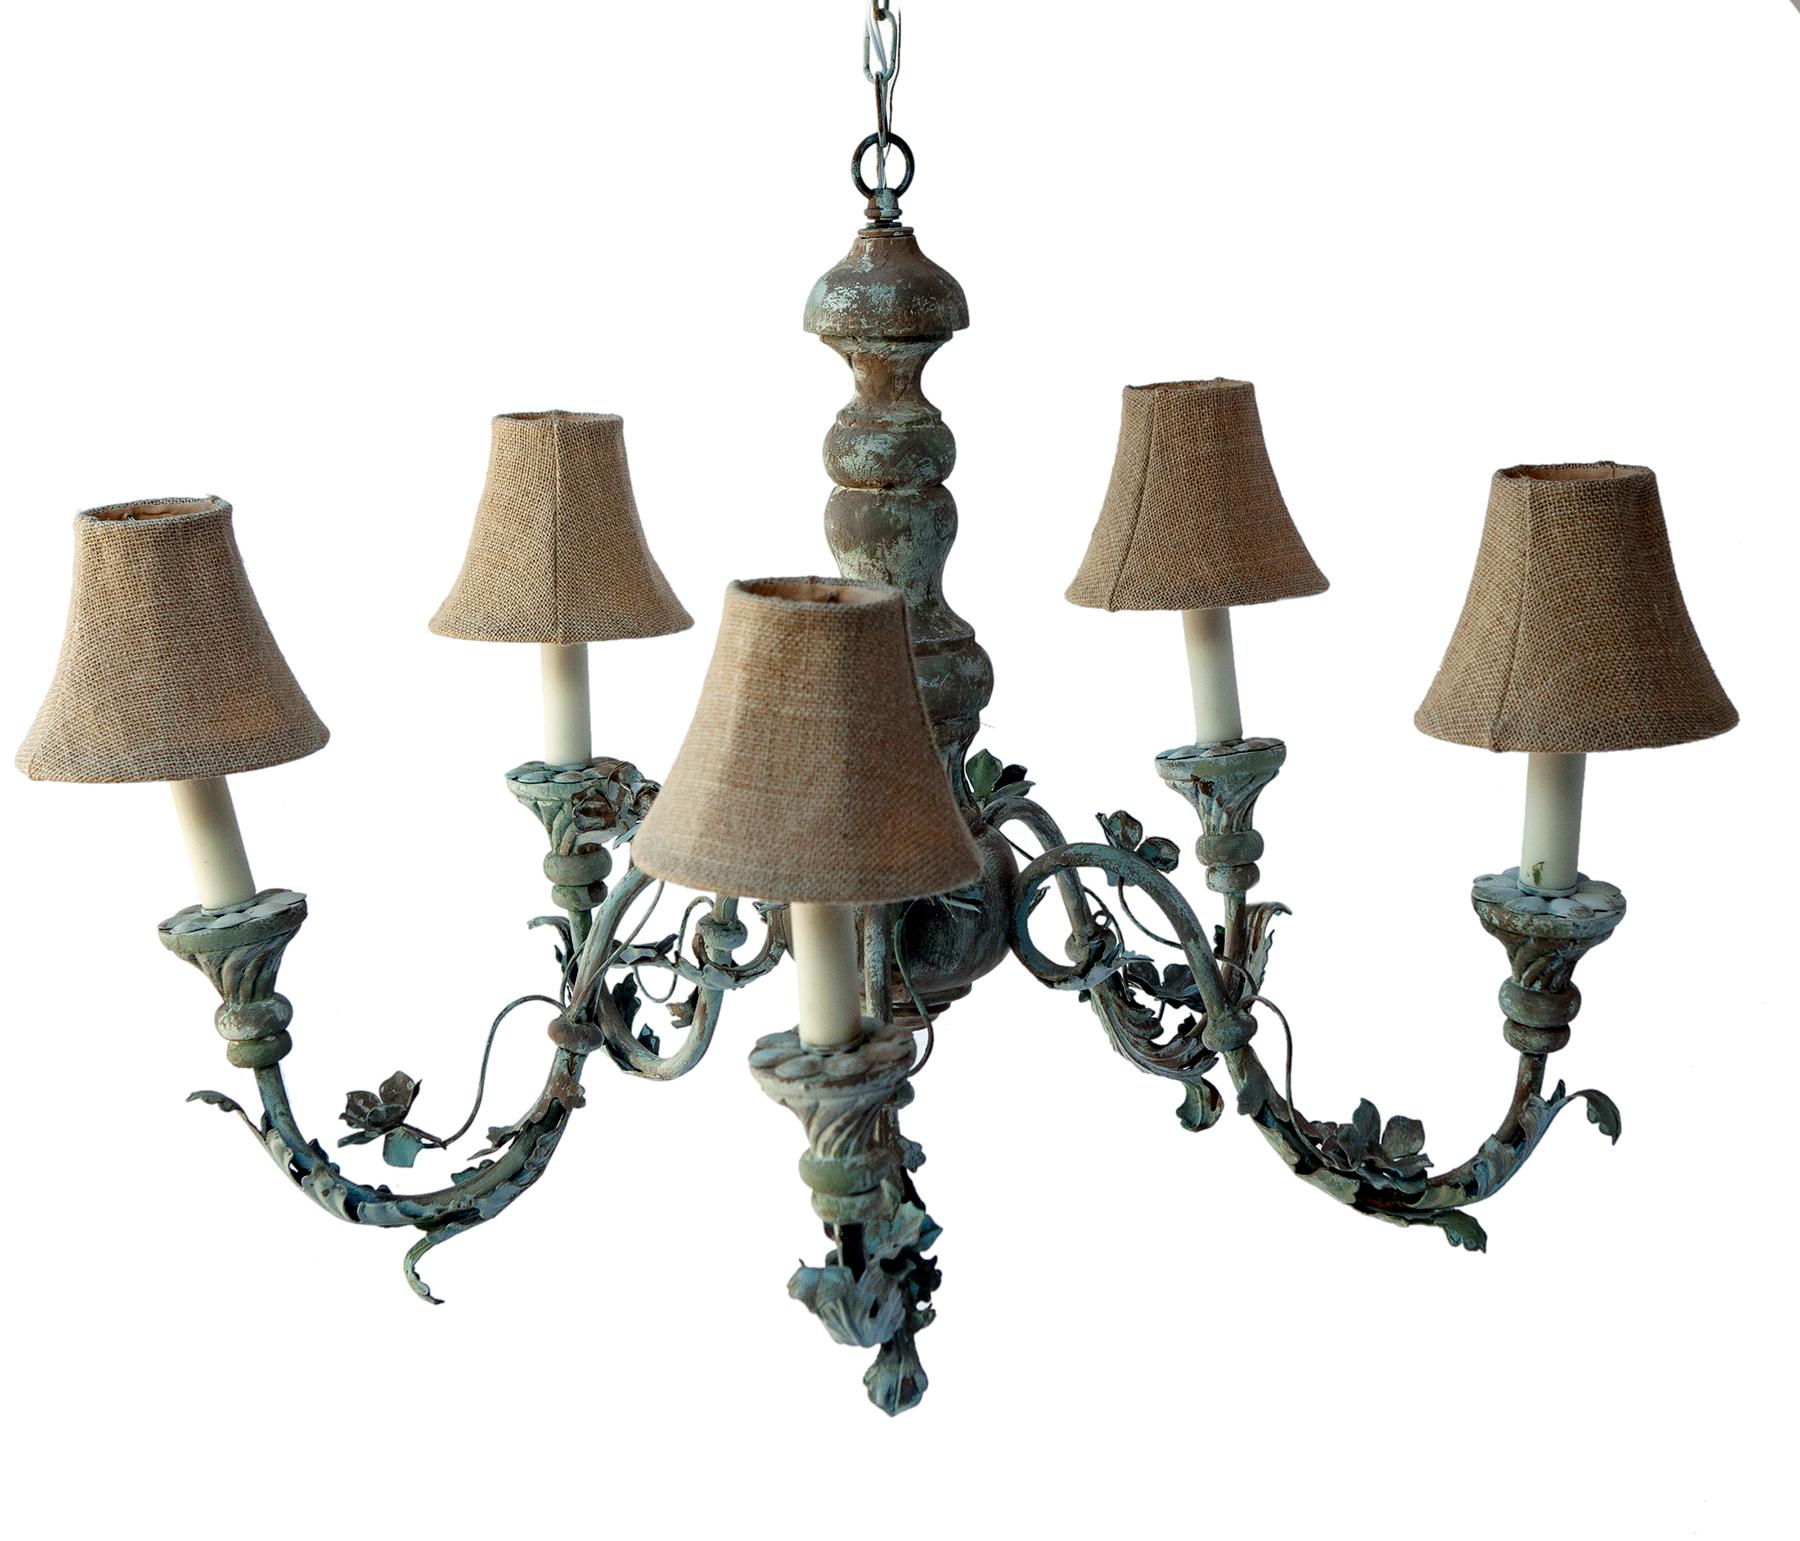 Rustic Iron Oak Leaf Metal & Wood Five Arm Chandelier with Burlap Shades For Sale